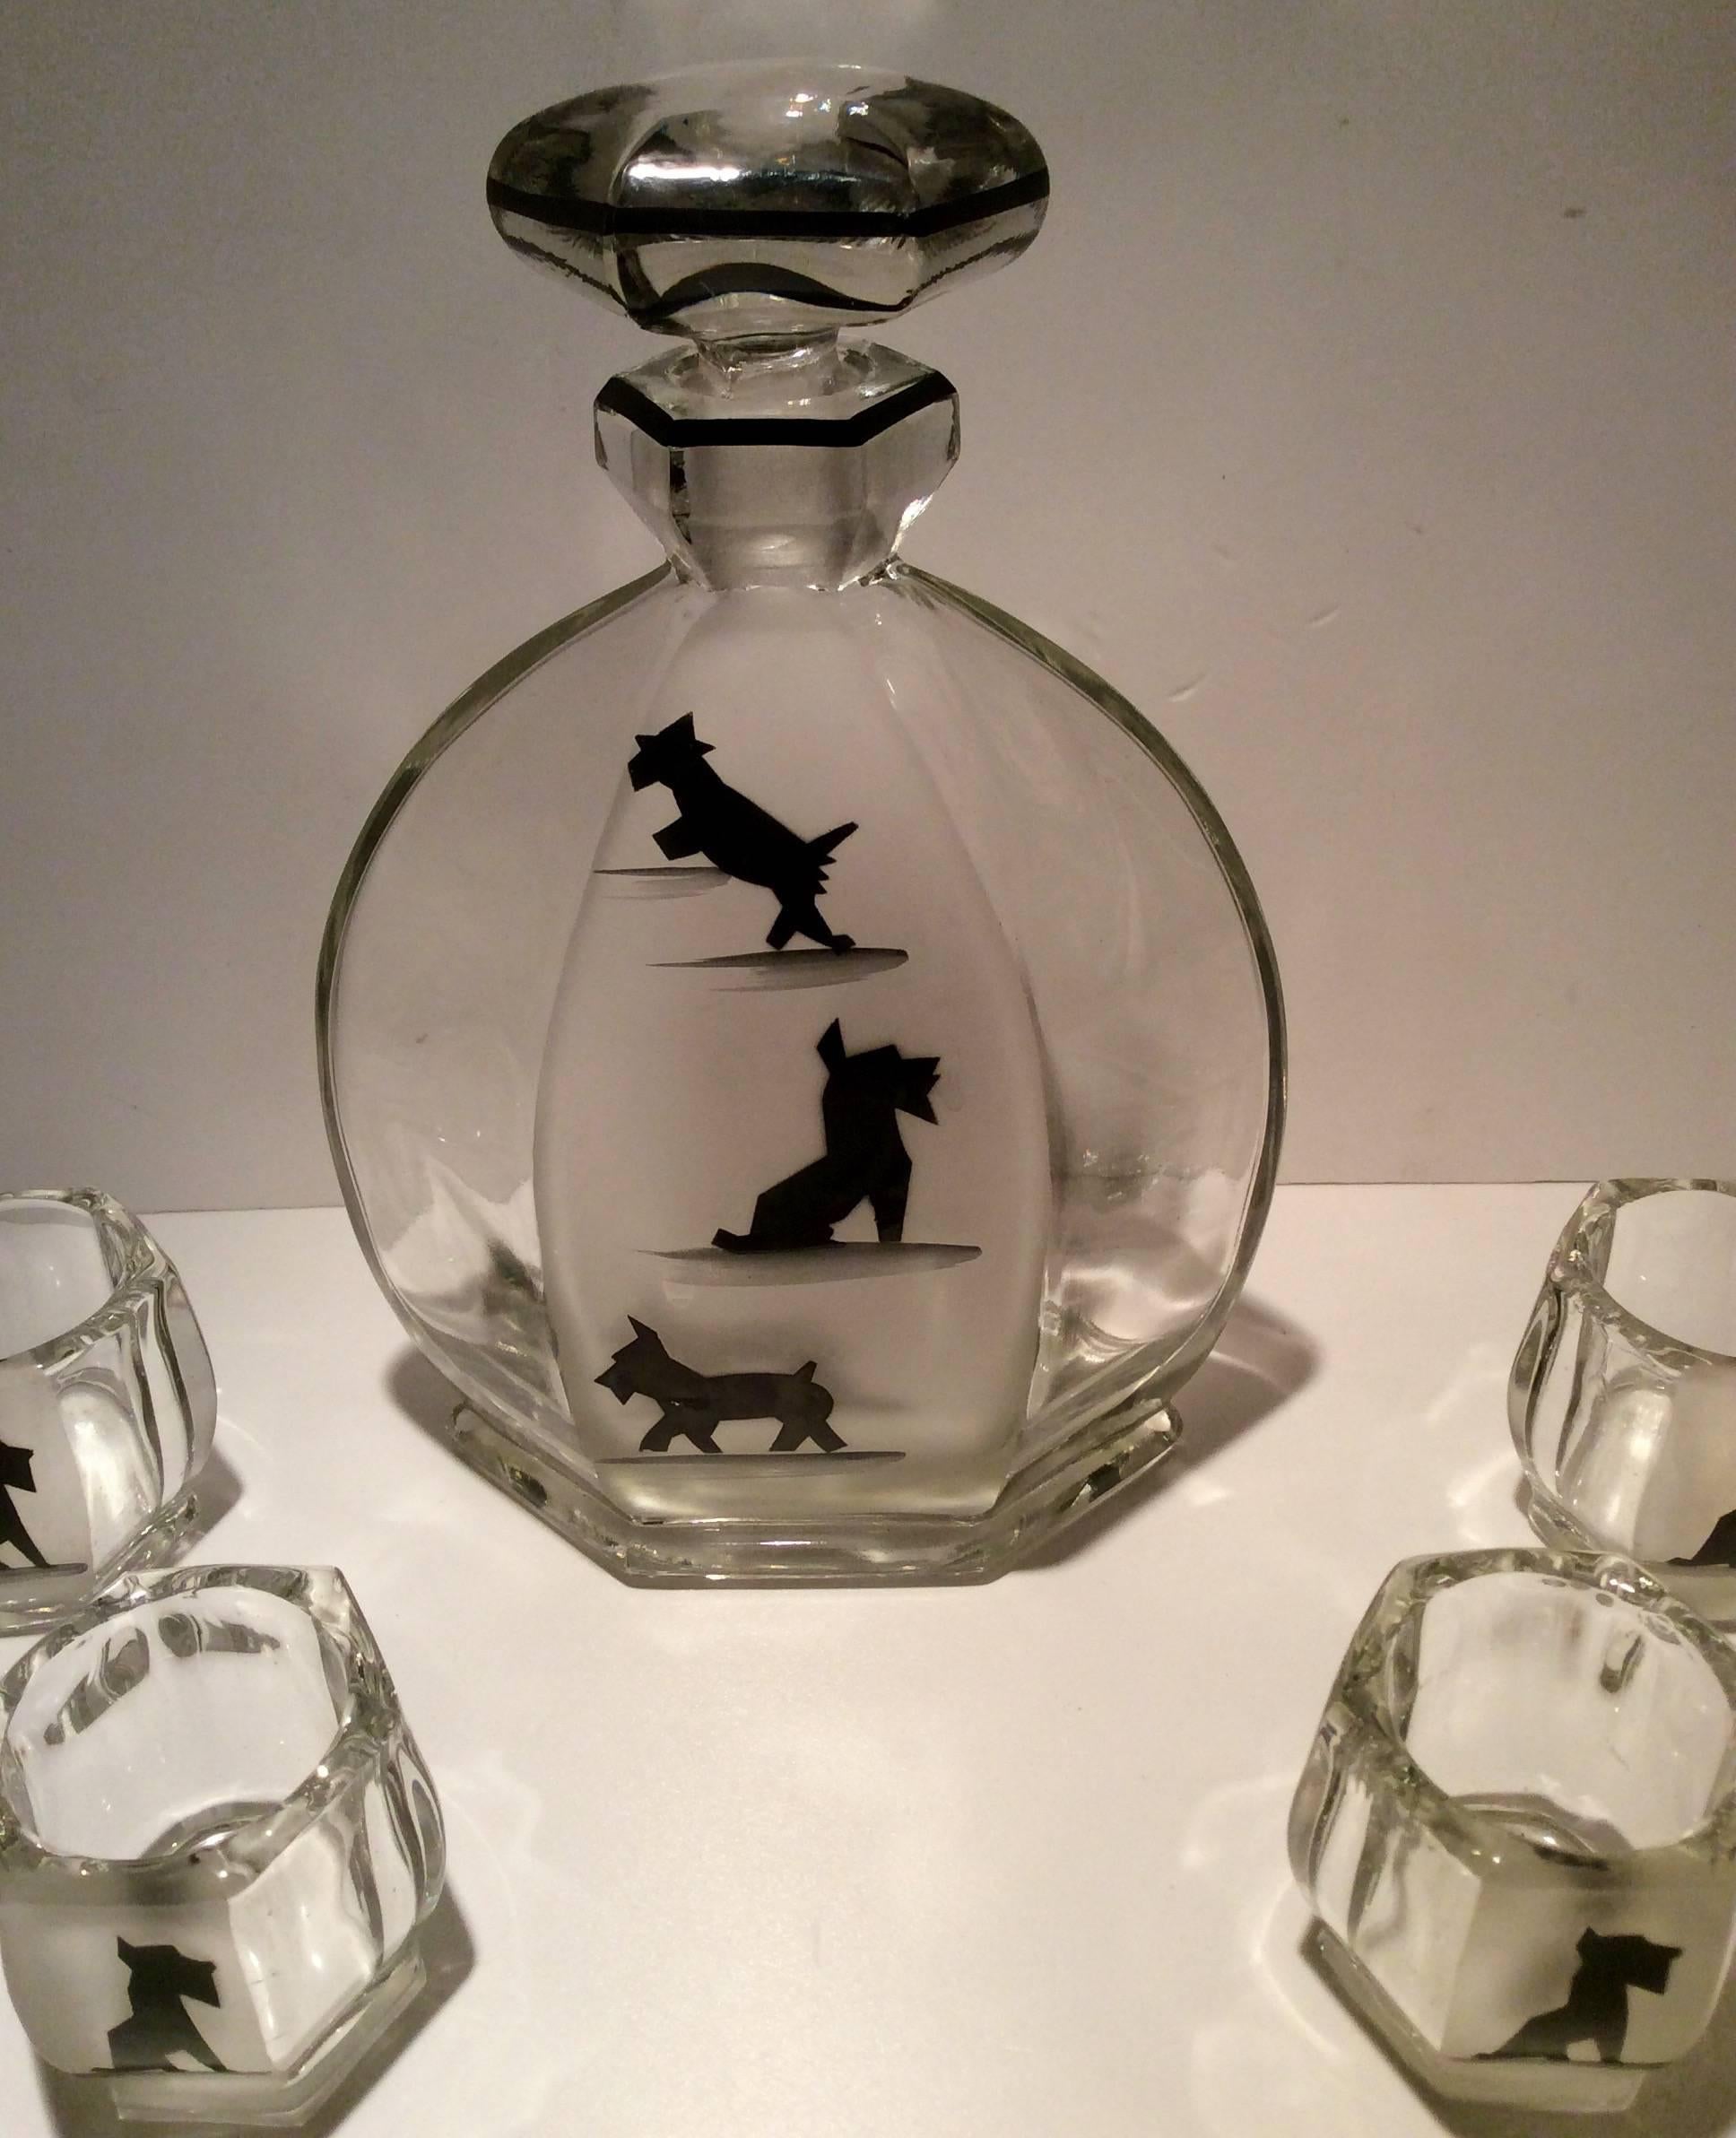 Awesome Art Deco liqueur set with Scottie dog decoration.
Faceted glass with the front panel frosted and a black Scottie dog decoration.
Dimensions: The decanter is 20 cm H, 14 cm W, 6 cm D.
The six glasses are 5 cm H, 5 cm W and 5 cm D.
French,